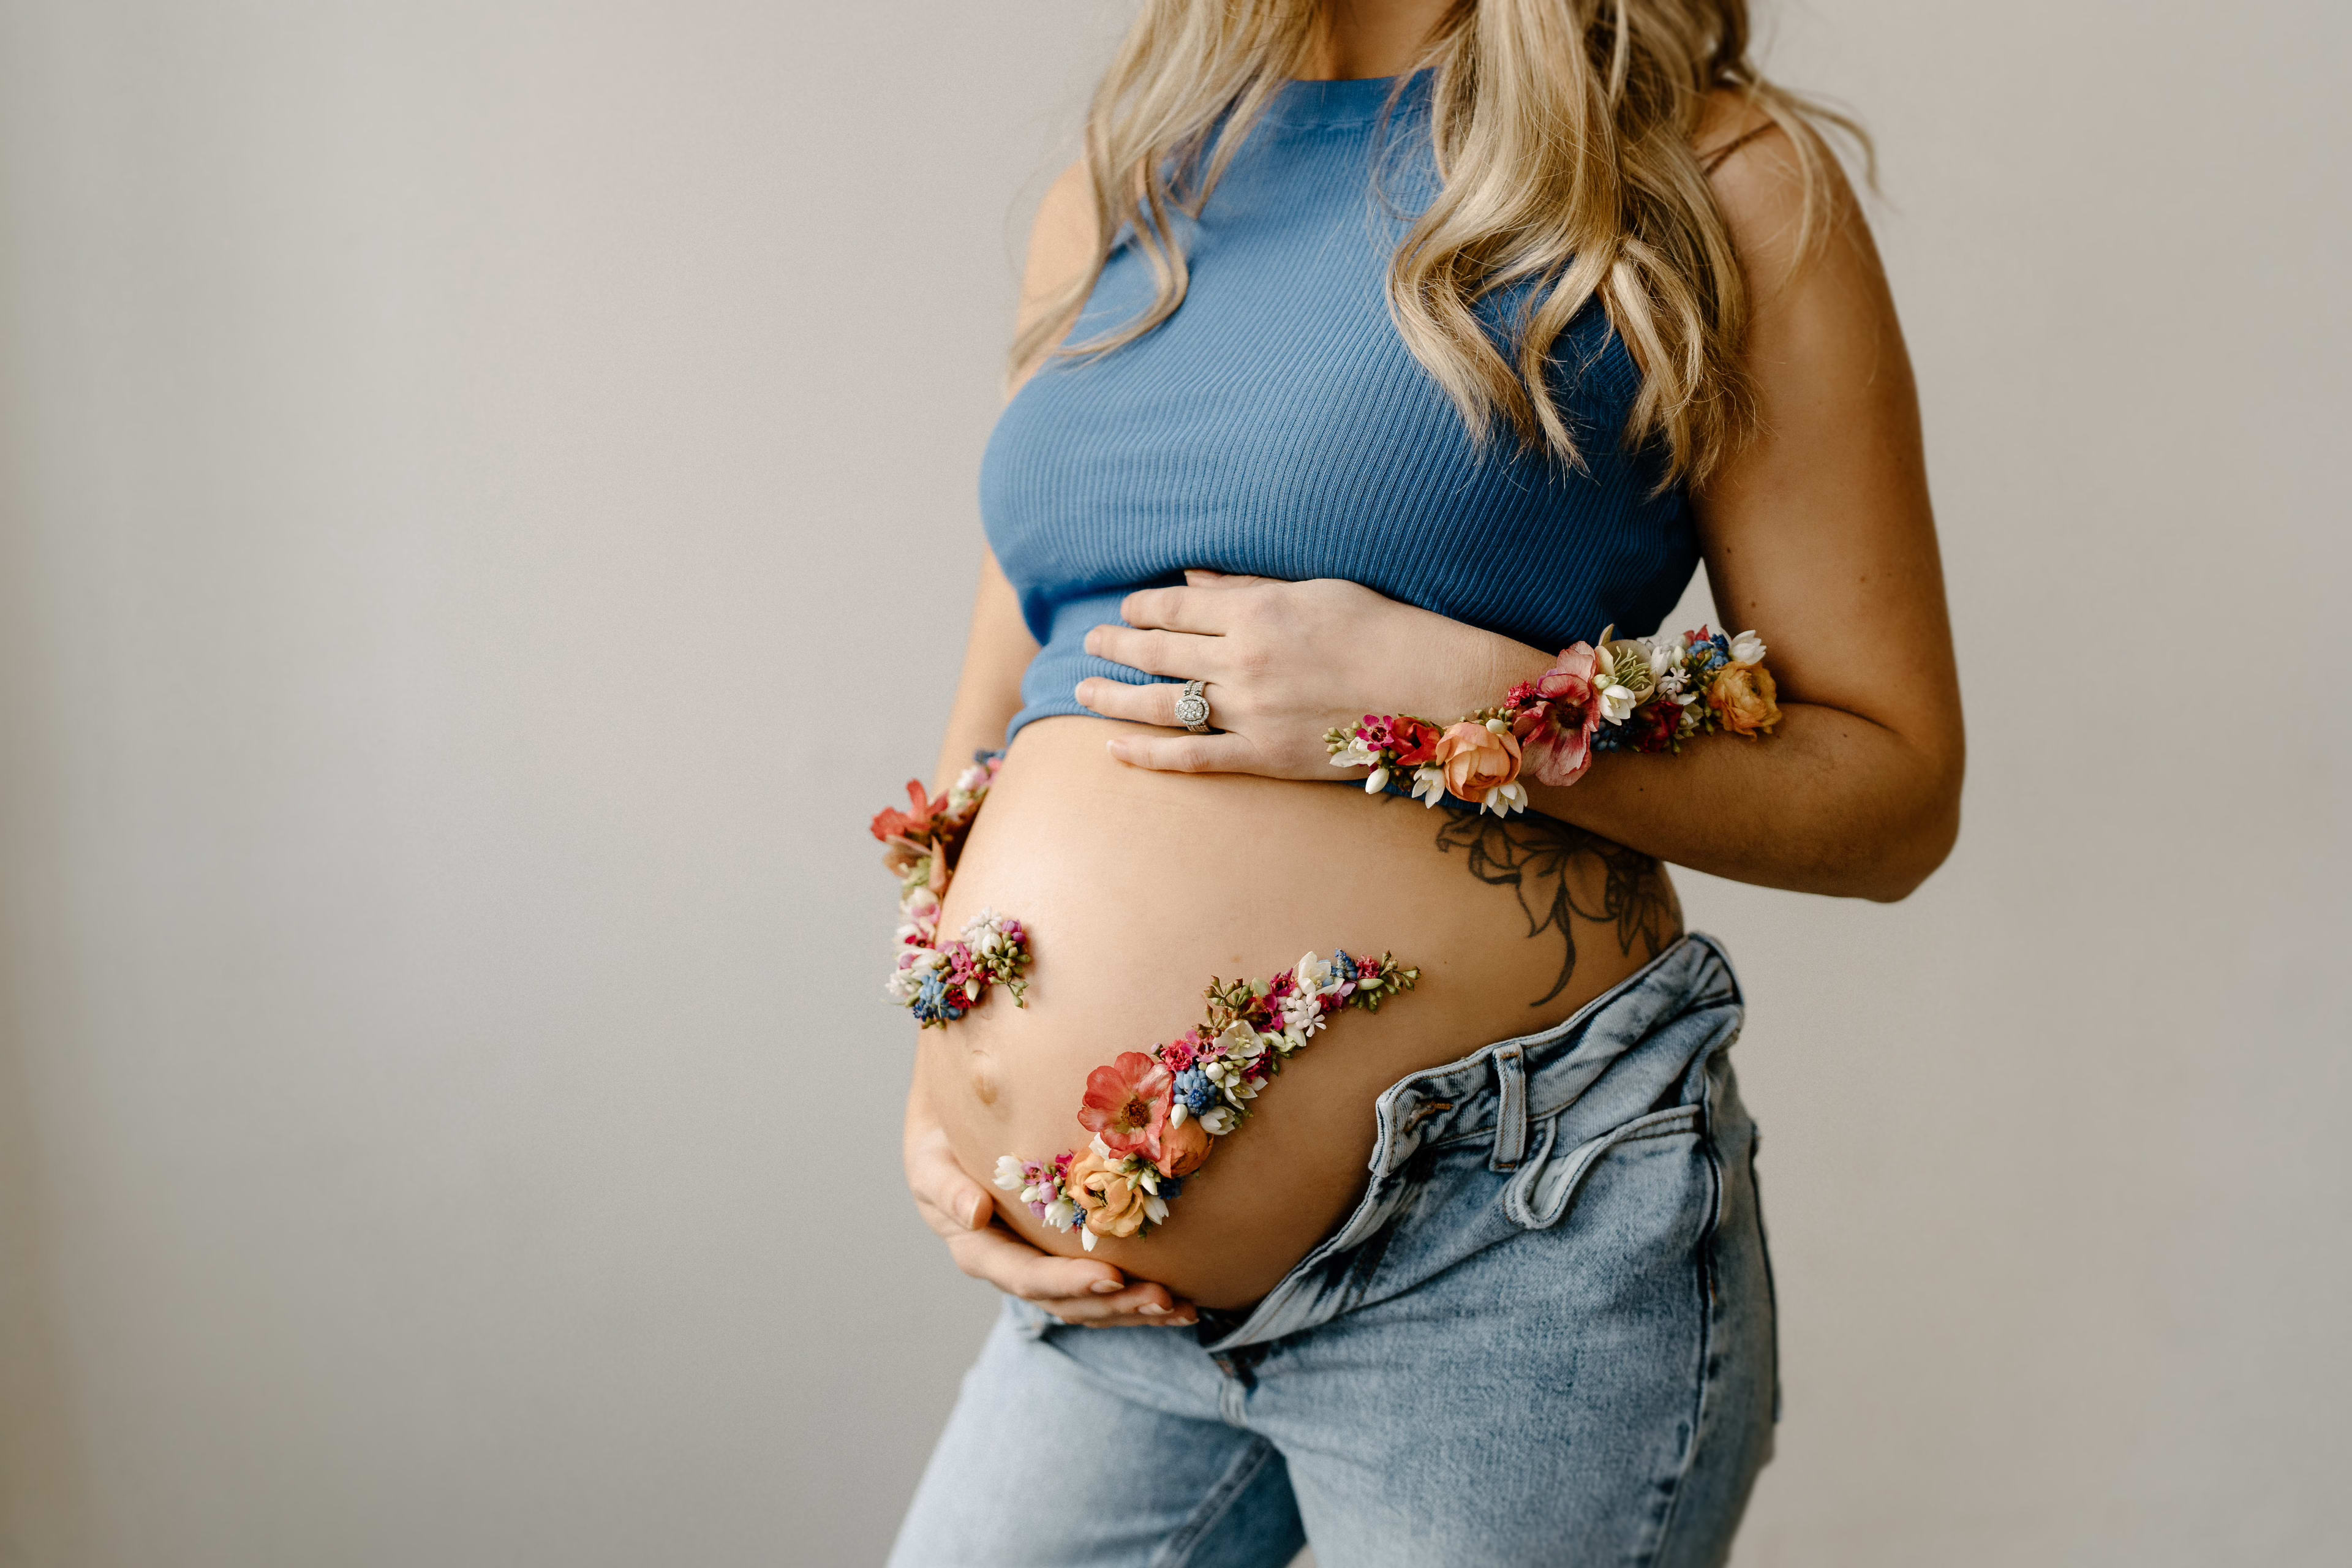 A spring maternity photo shoot featuring a pregnant woman in a blue top and jeans.